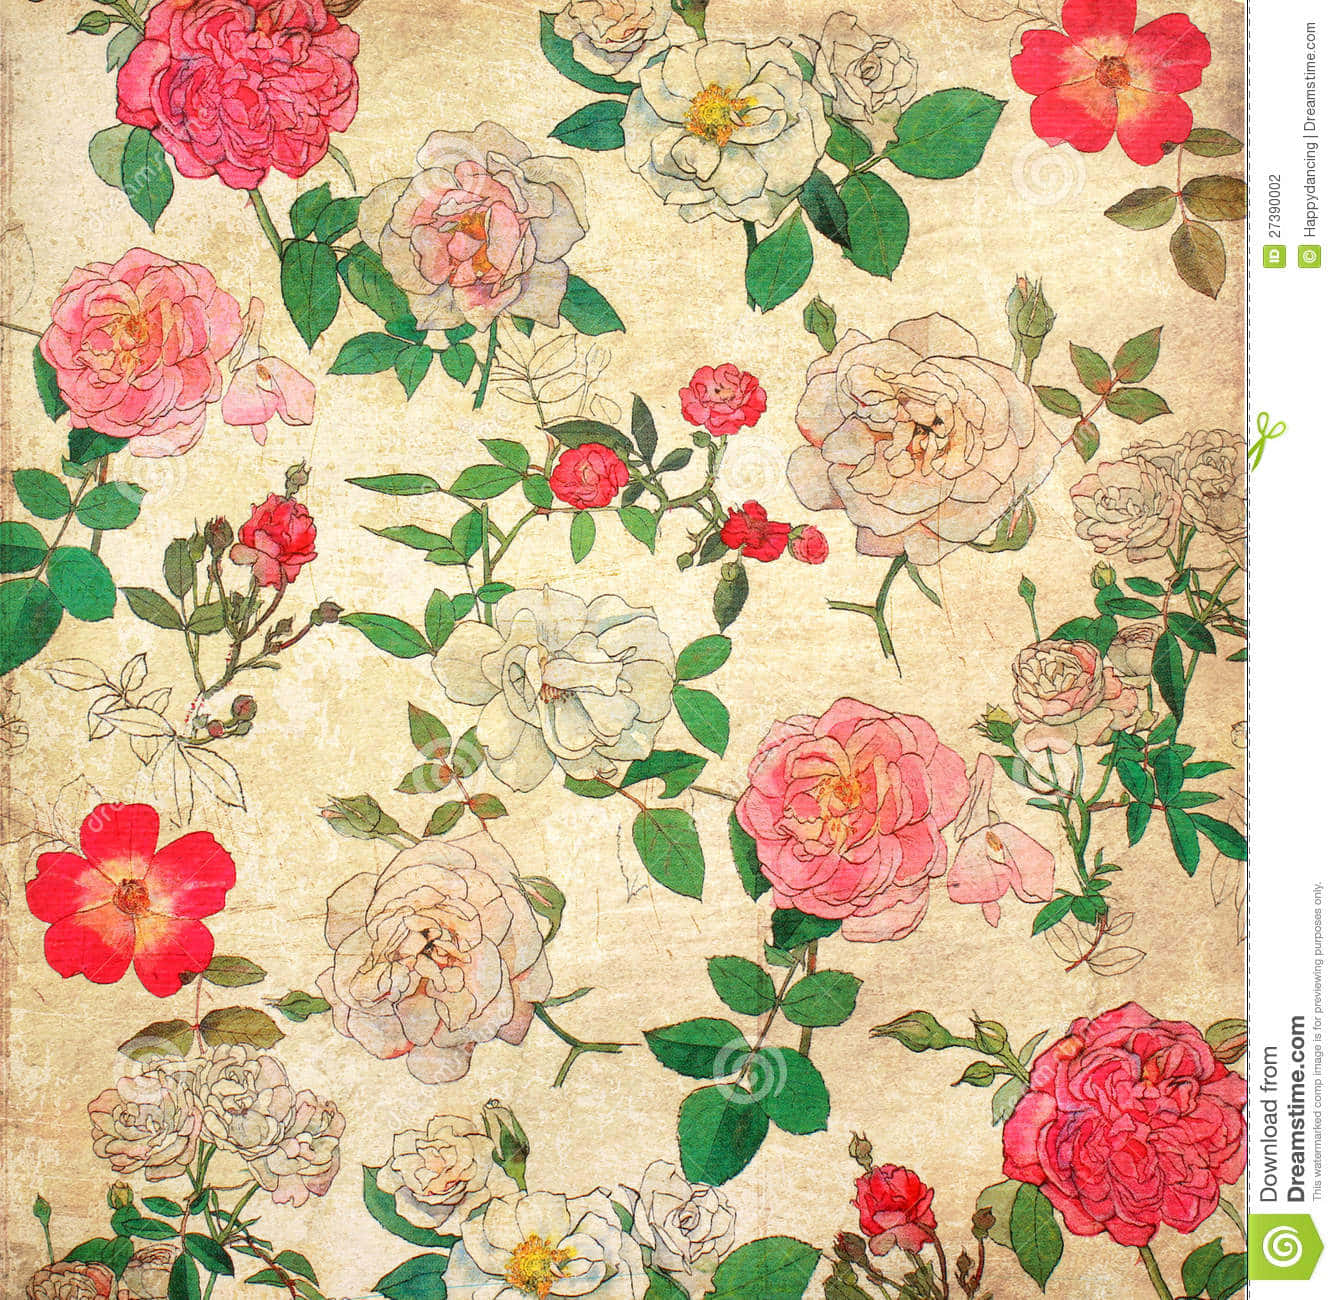 "A vibrant vintage flower with delicate petals and an elegant stem" Wallpaper